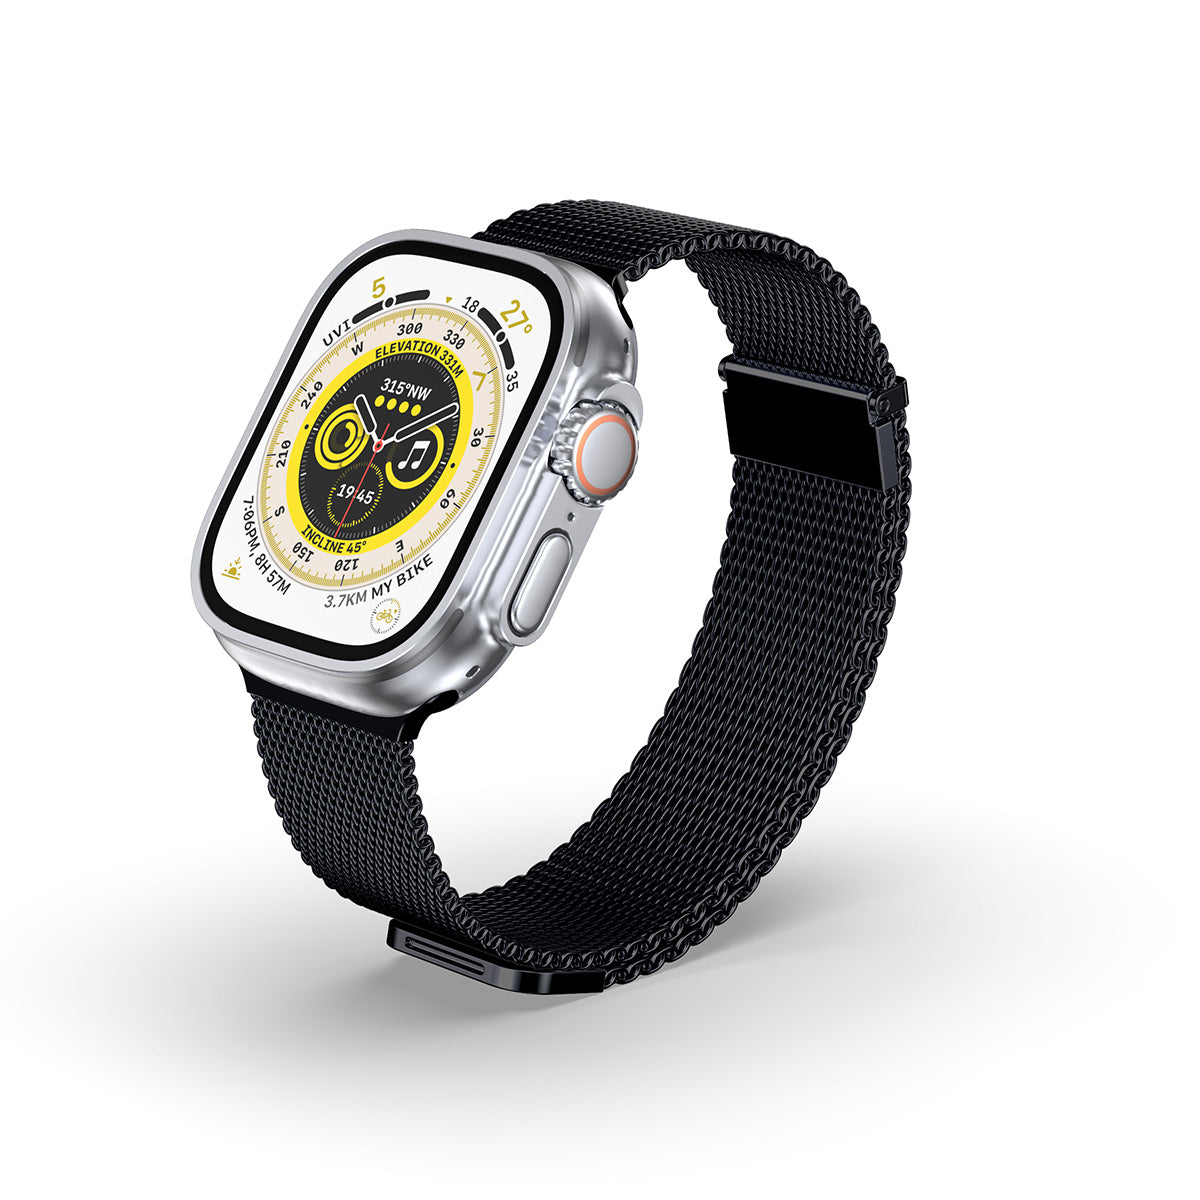 Case Studi Woven Stainless Steel Band For Apple Watch